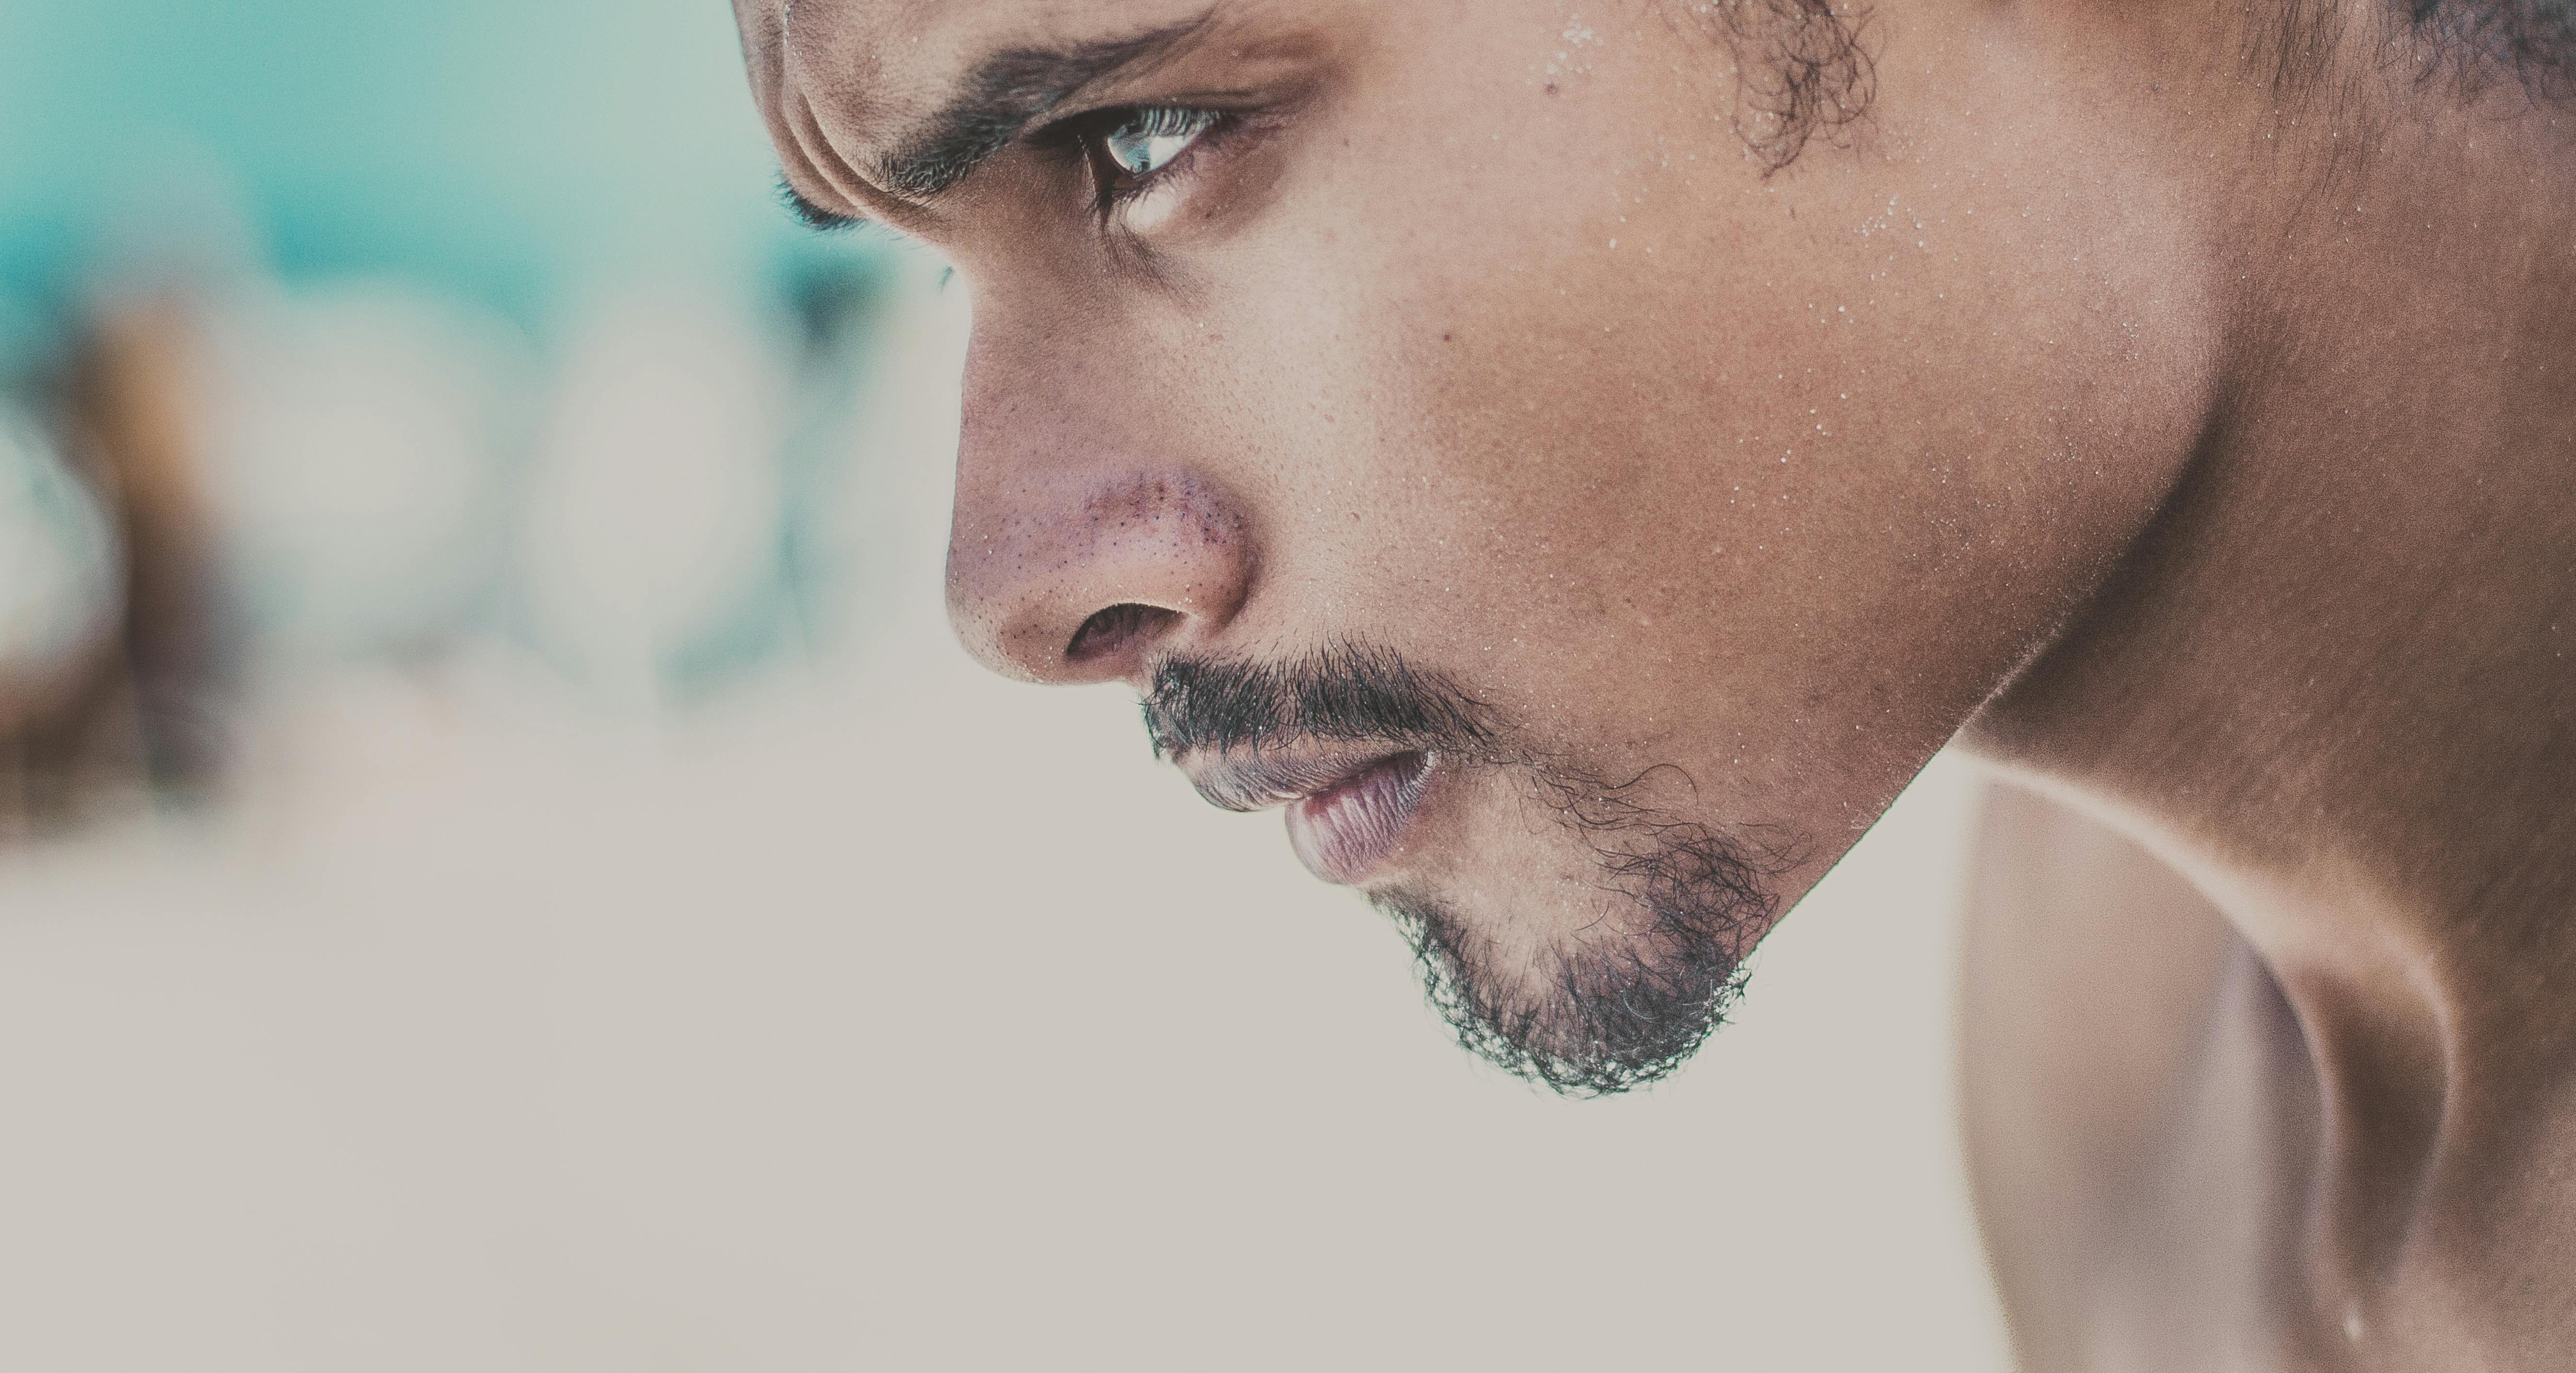 Angry determined man | Source: Pexels